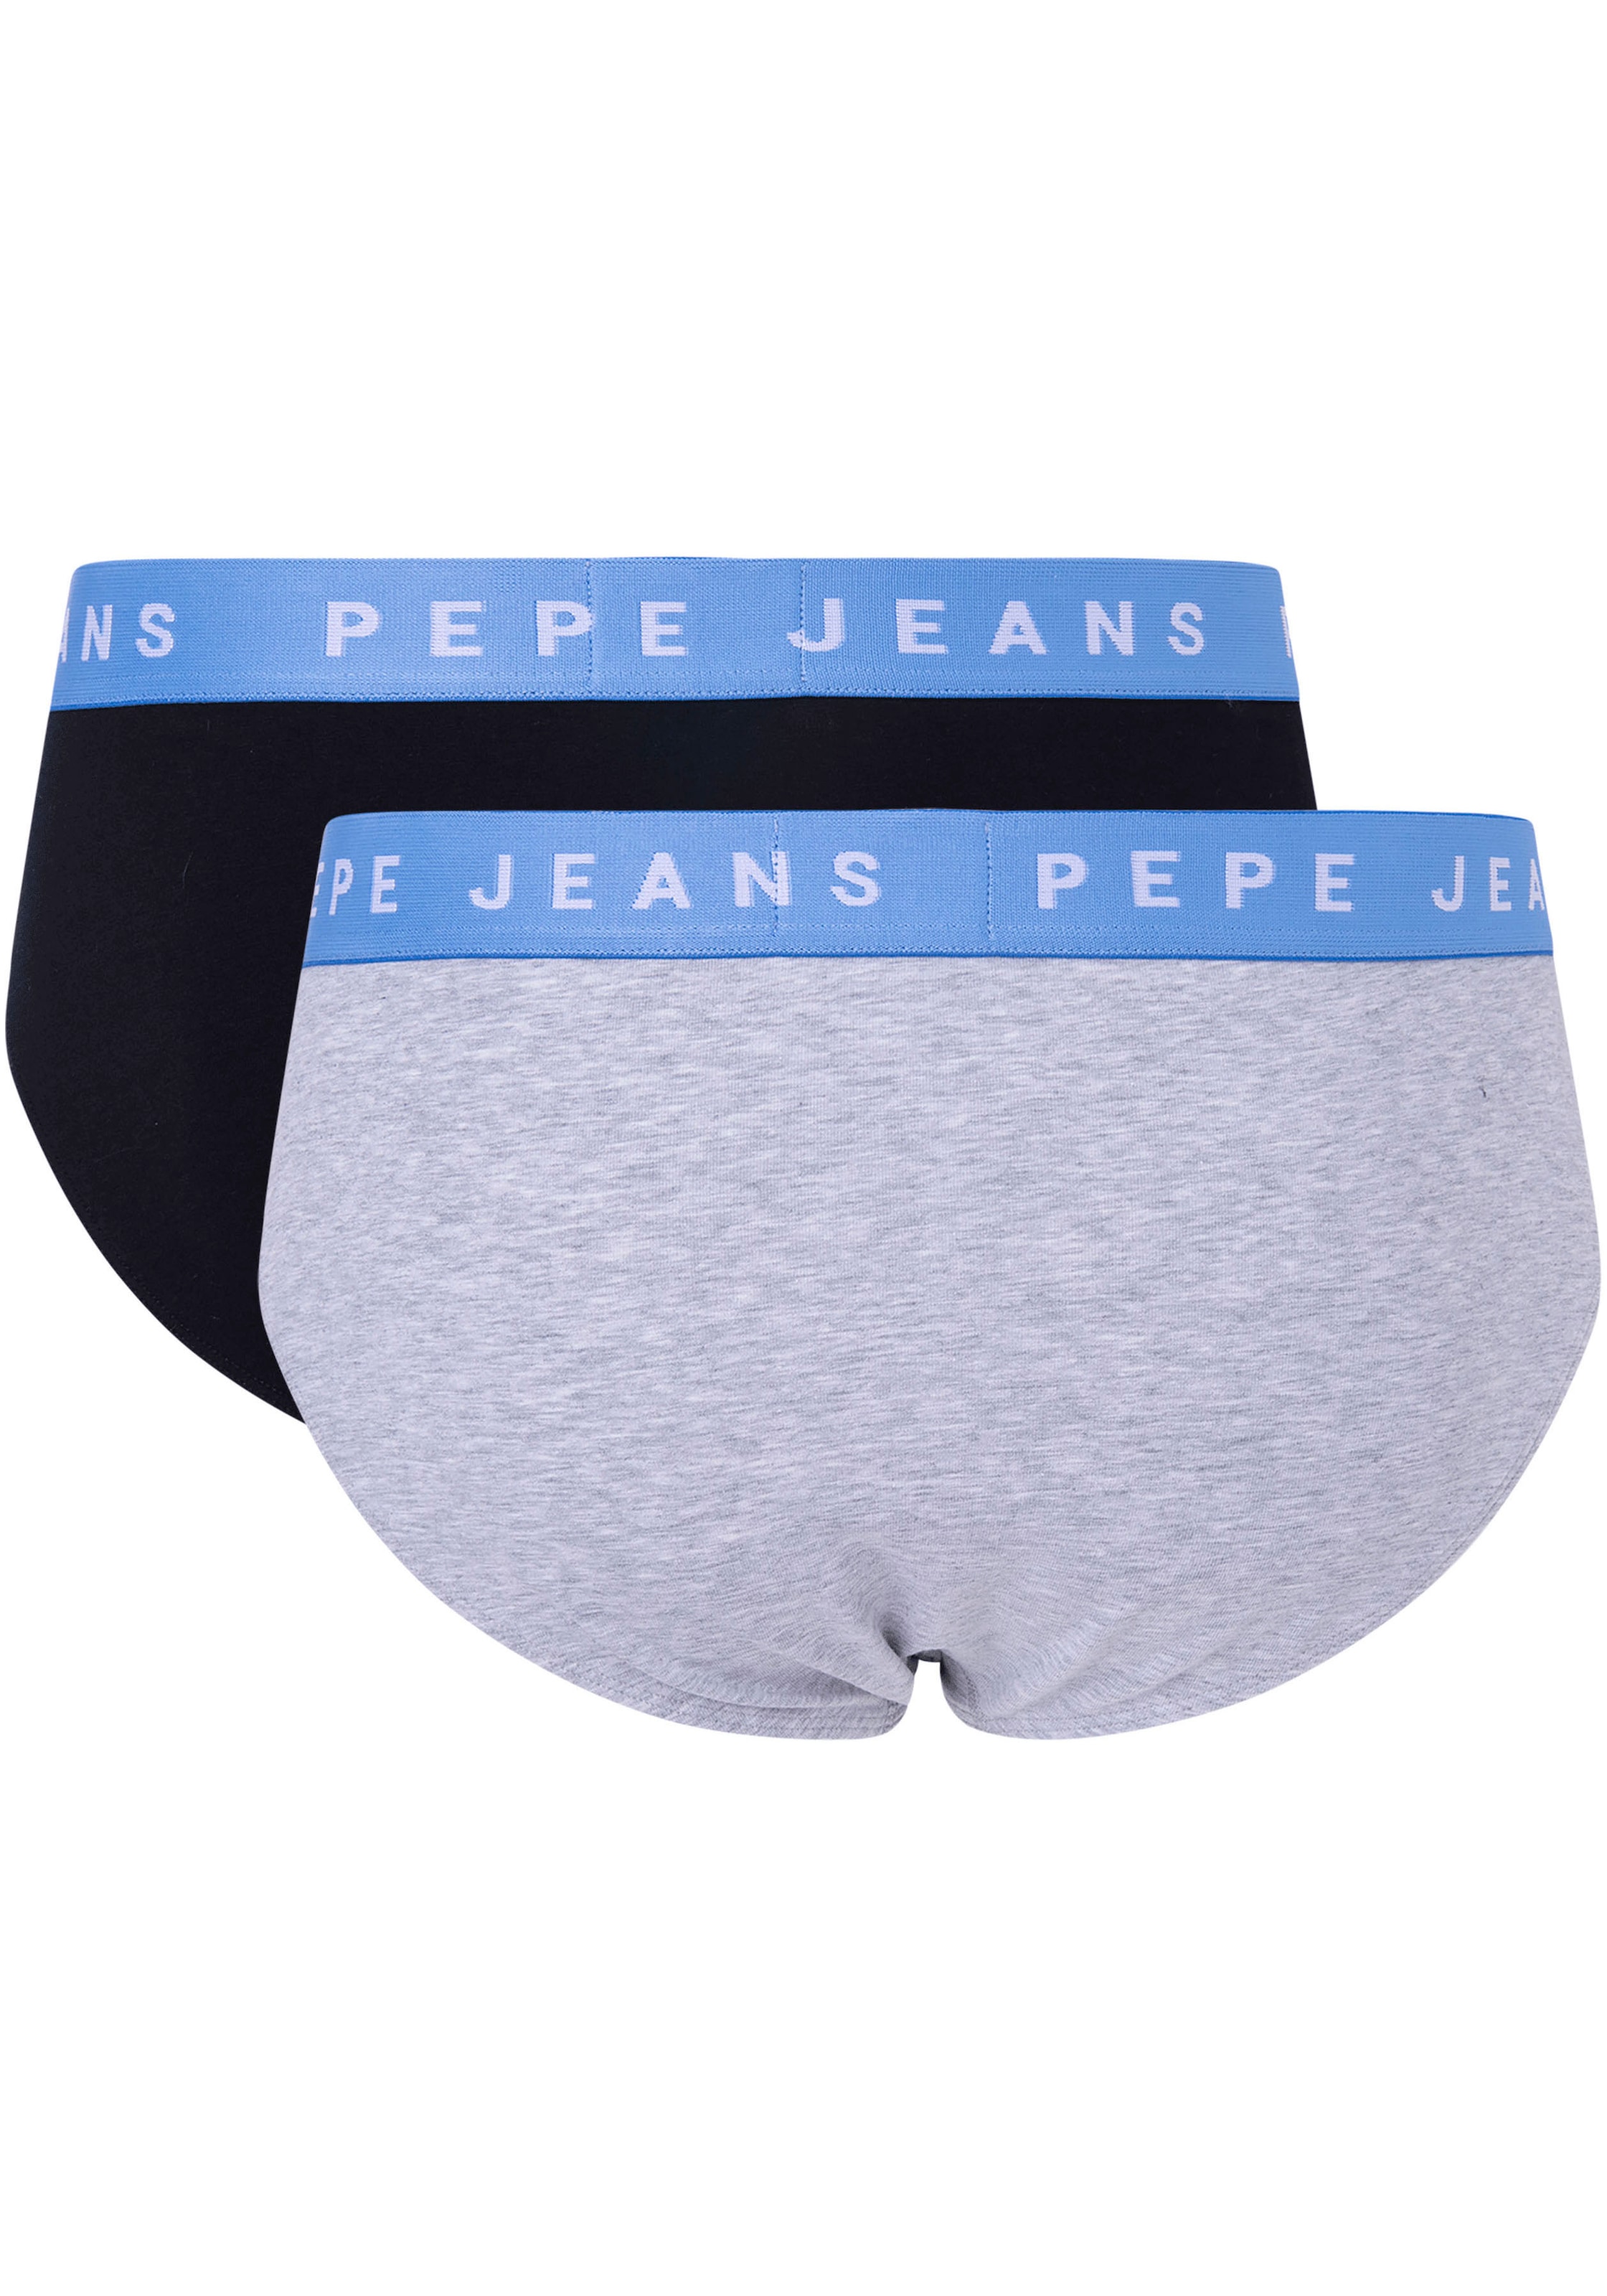 Pepe Jeans Slip, (Packung, 2 St.)